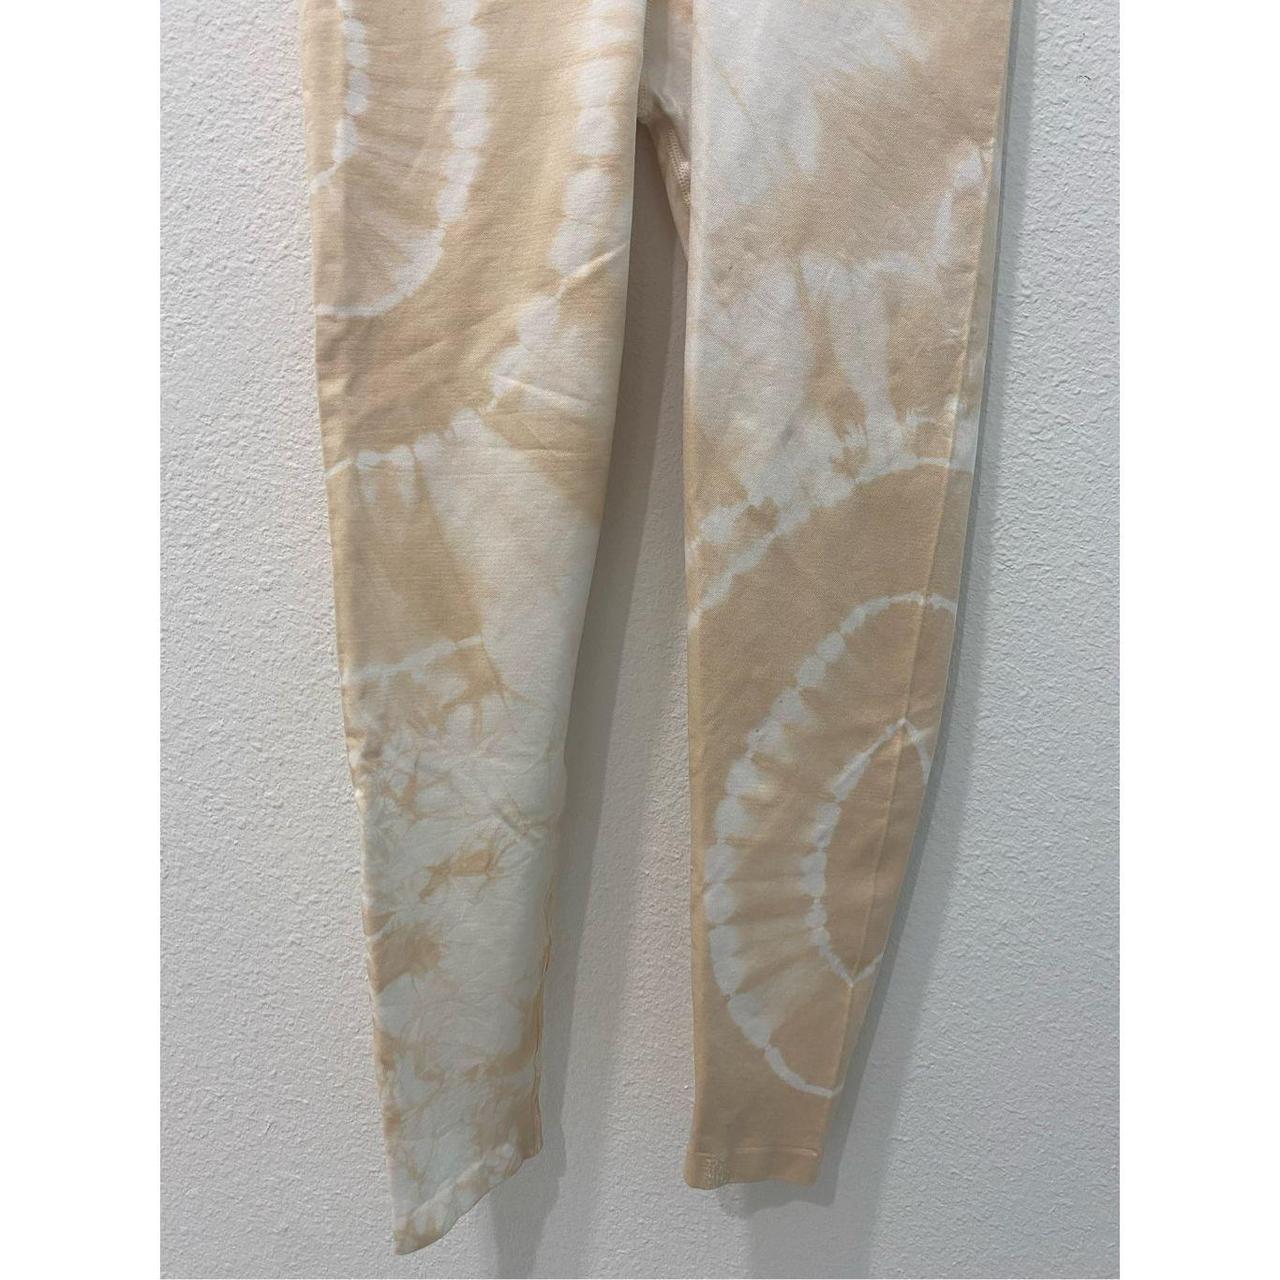 Aerie Orange and White Tie Dye High Waisted Leggings size small